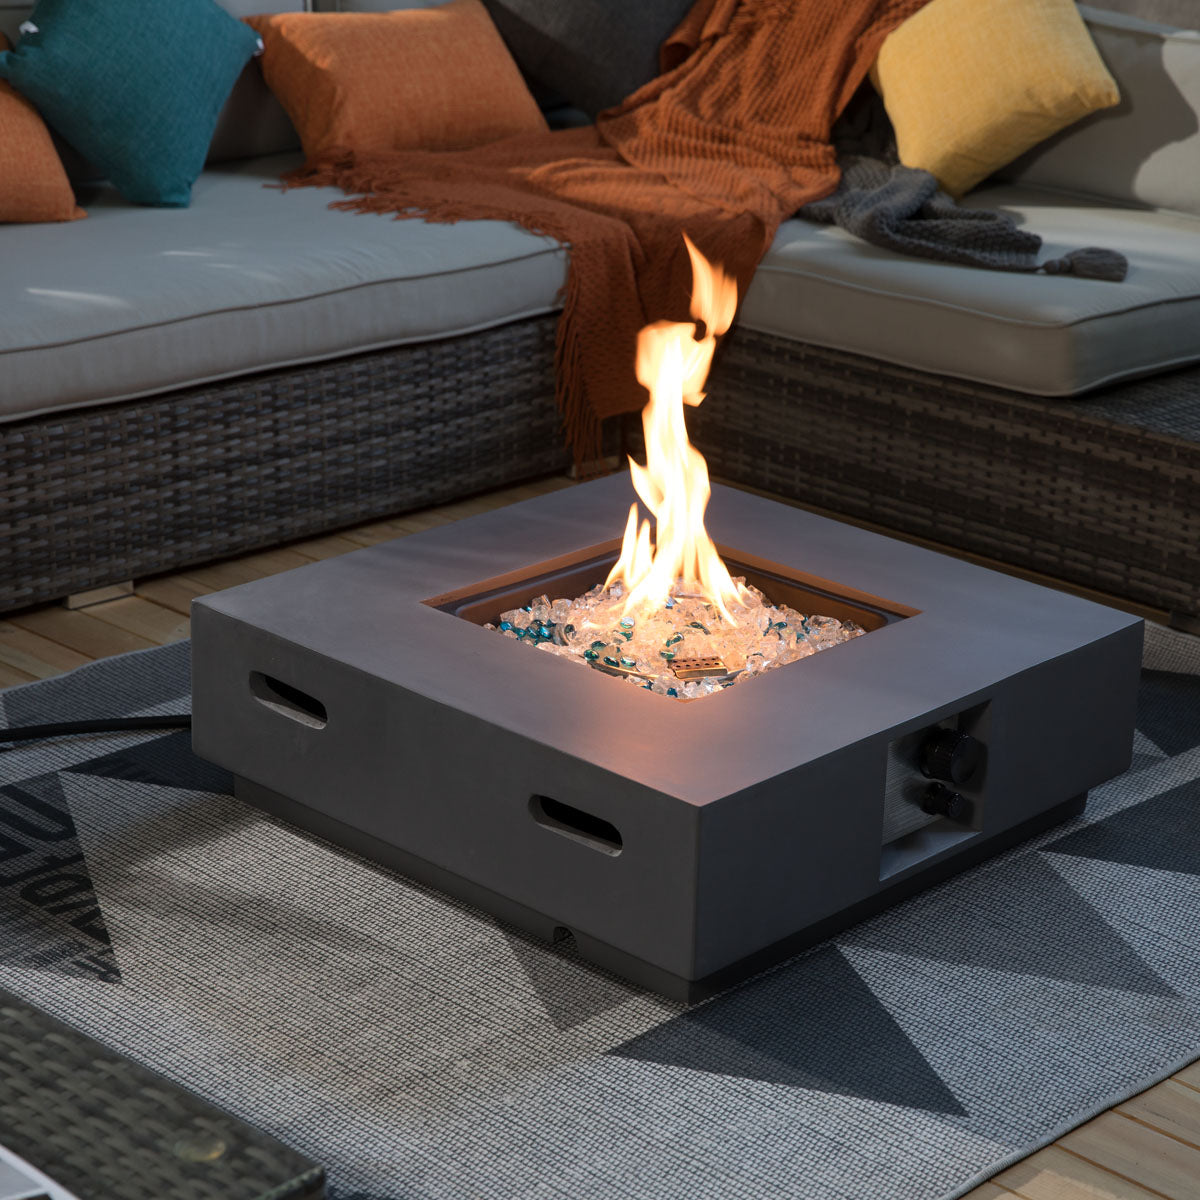 28" Outdoor Propane Fire Pit Table -Grey Concrete